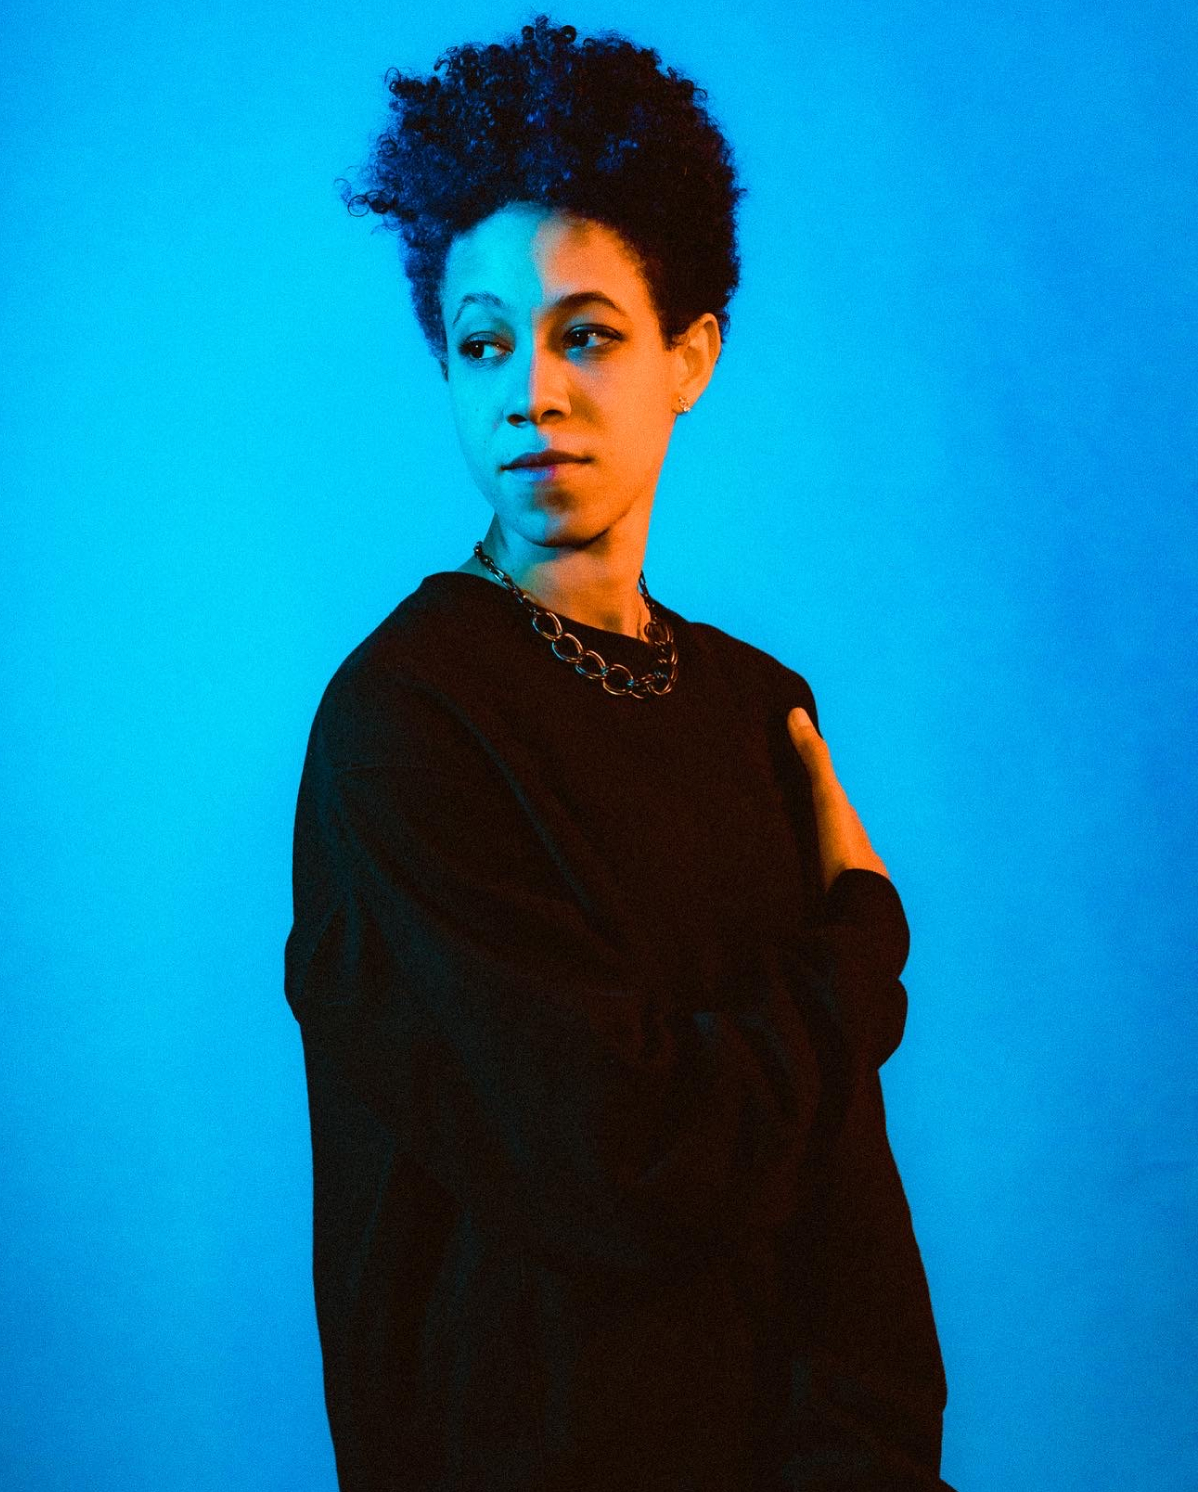 A person with short, curly hair stands against a blue background, wearing a dark sweater and a chain necklace. They have one arm bent, touching their opposite shoulder, while gazing slightly to the side with a contemplative expression.